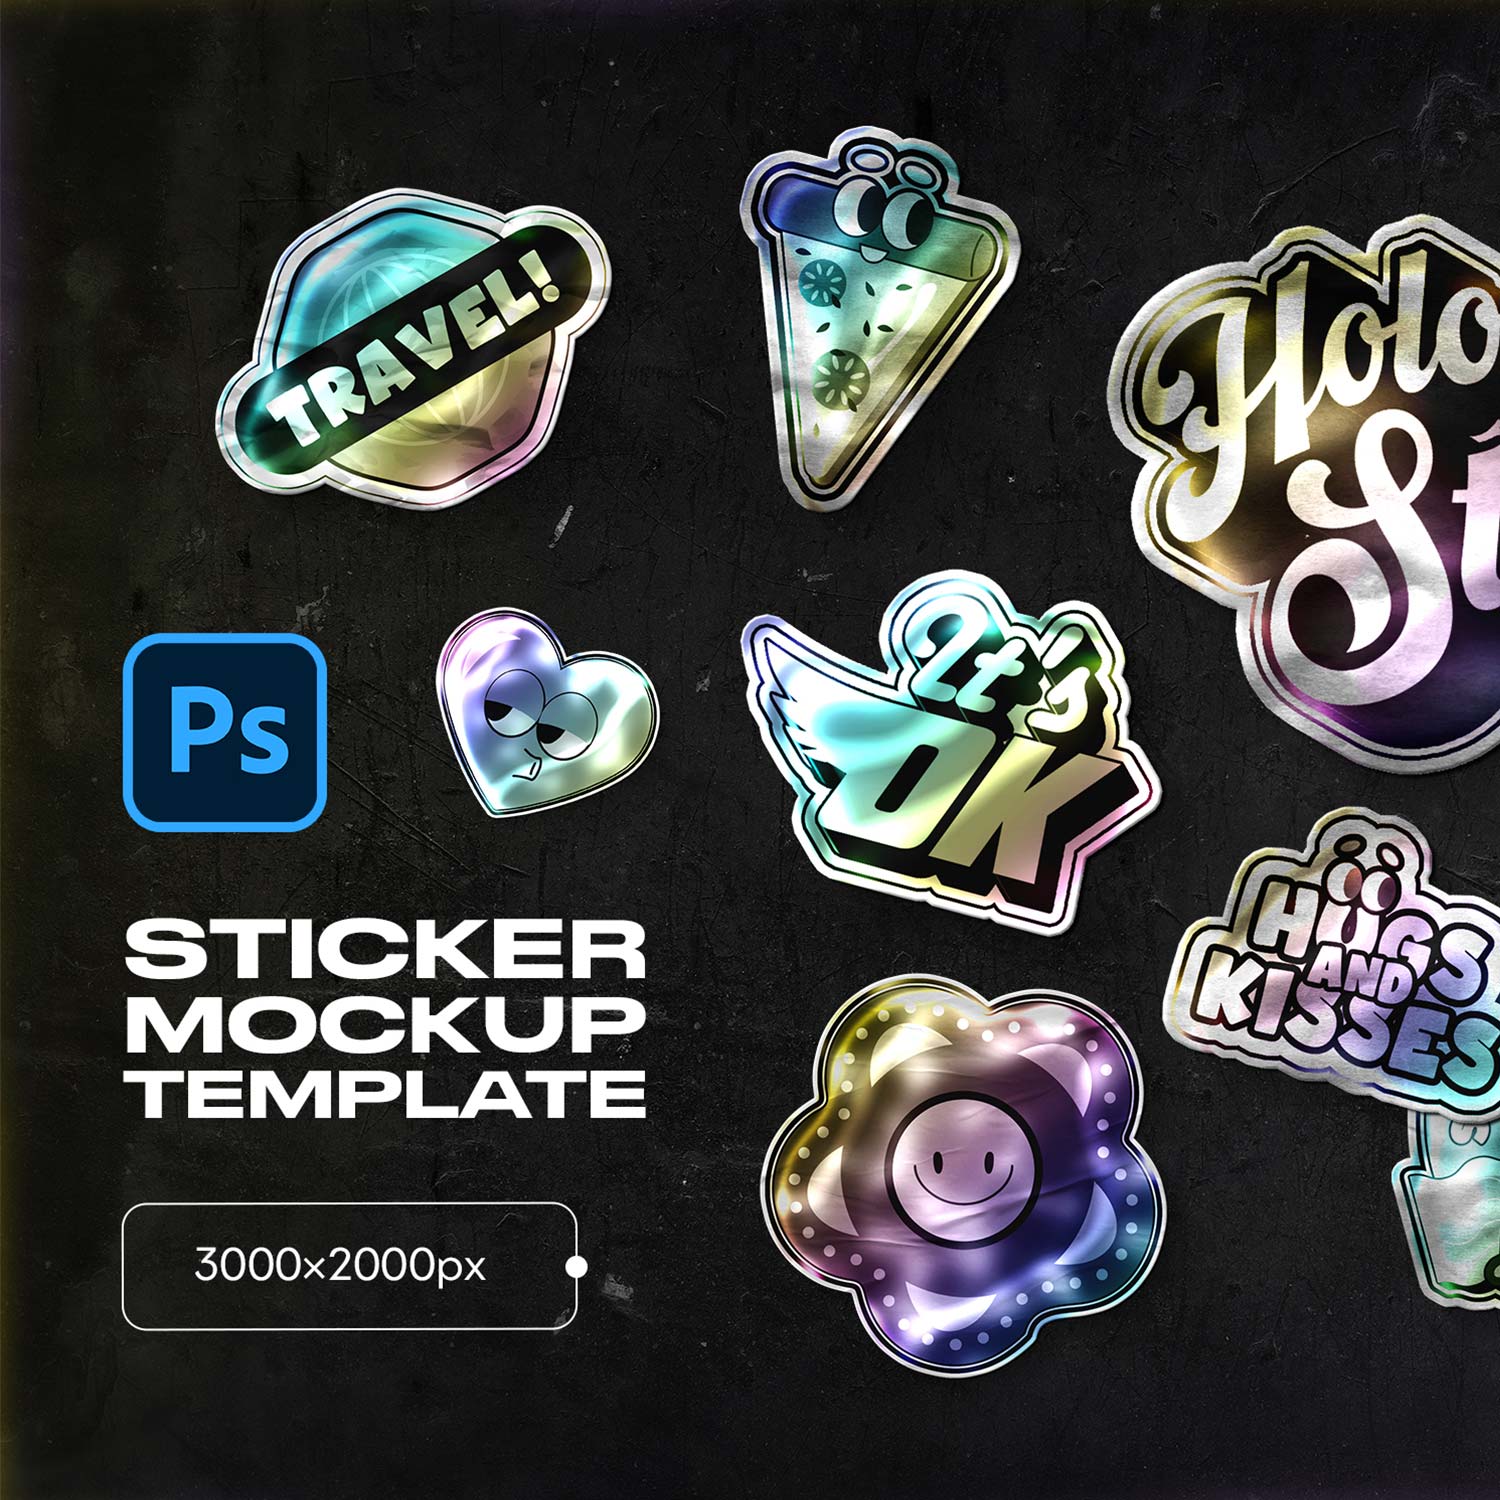 Holographic Sticker Mockup cover image.